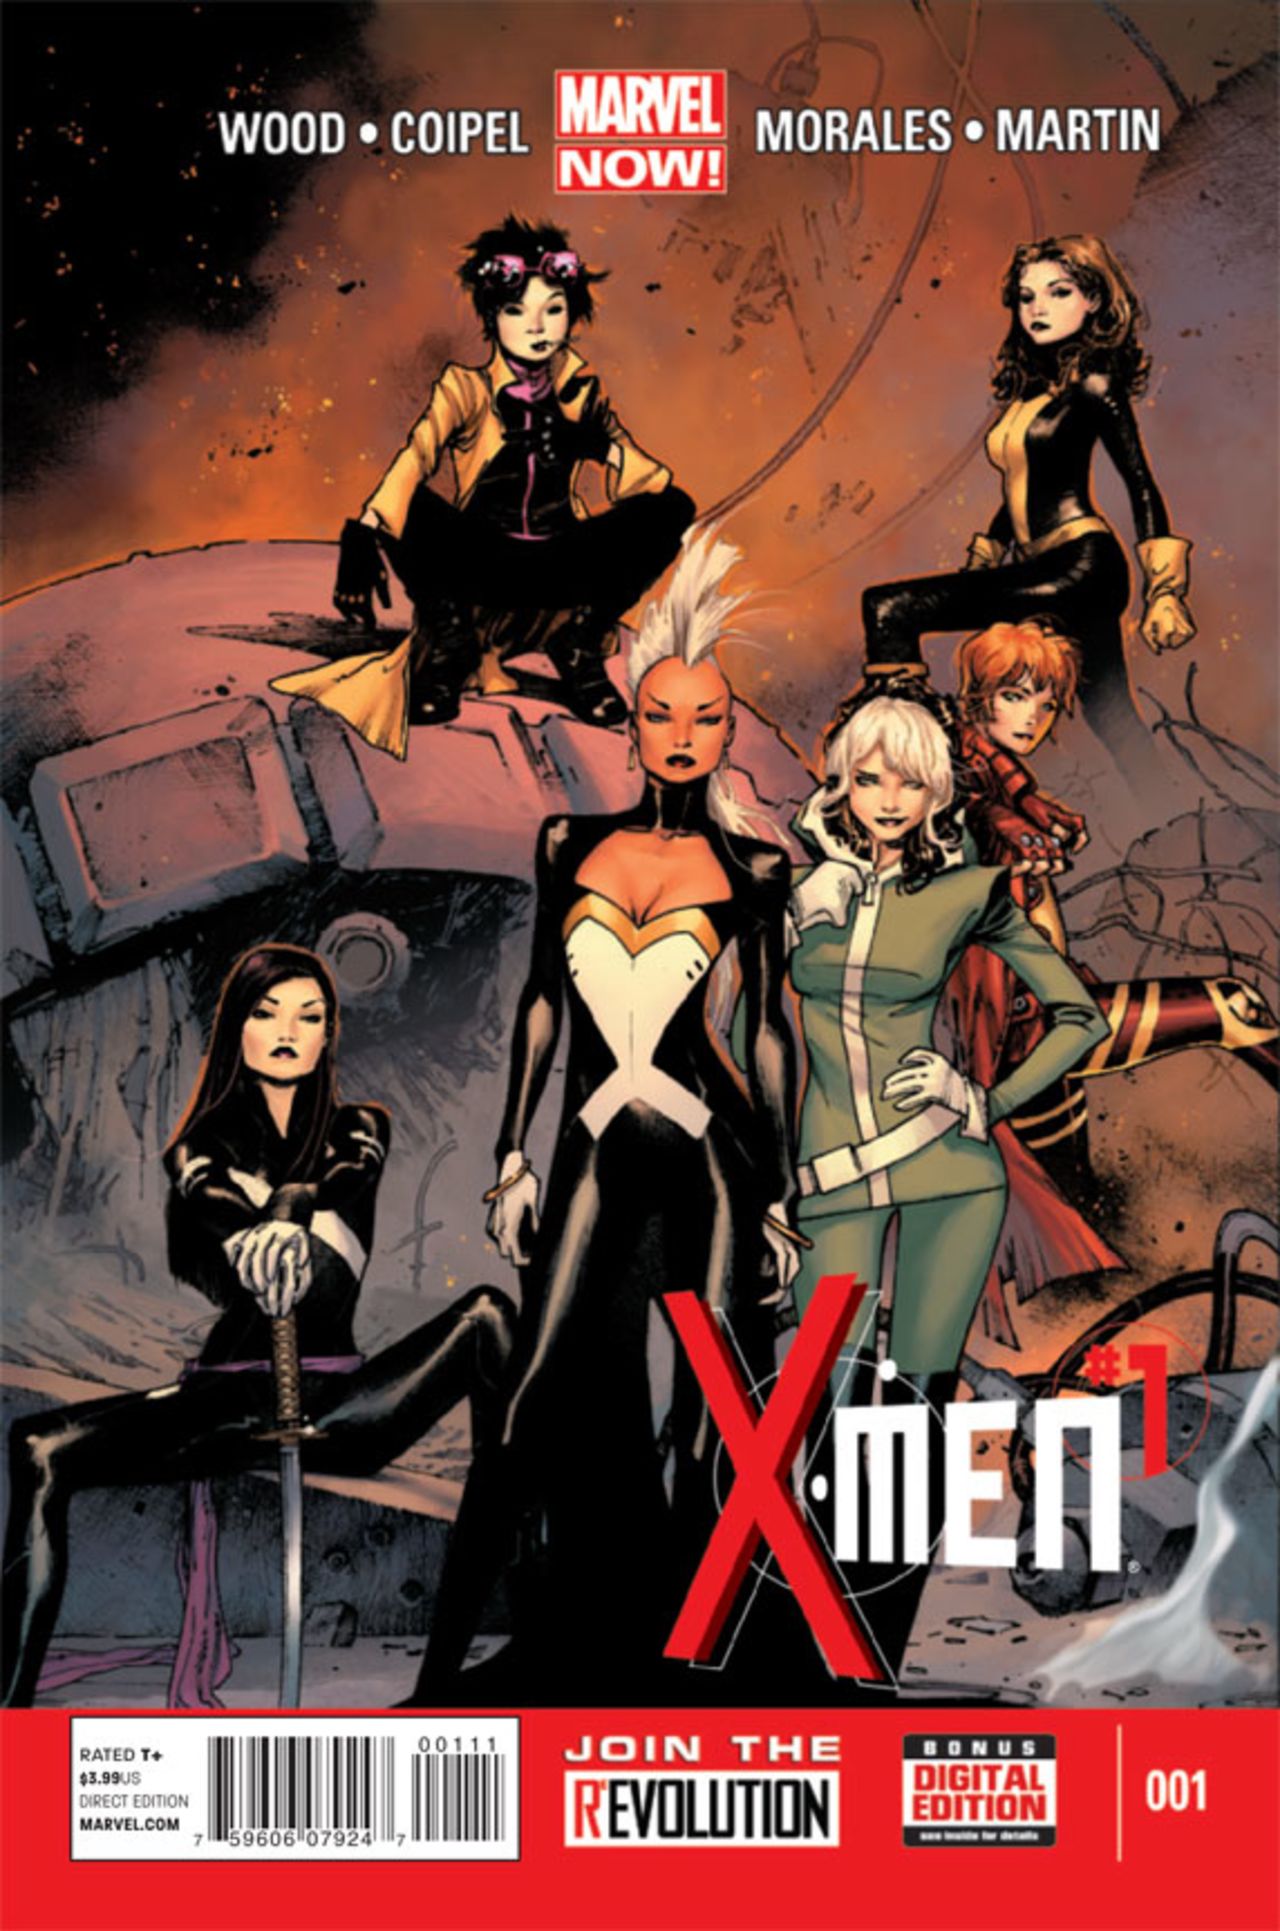 For the first time in its 50-year history, the X-Men will be made up  entirely of women: Storm, Rogue, Jubilee, Kitty Pryde, Rachel Grey and Psylocke make up the mutant team in "X-Men" #1, in stores May 29. Check out more of this exclusive look at that first issue (hide captions to get the full picture).